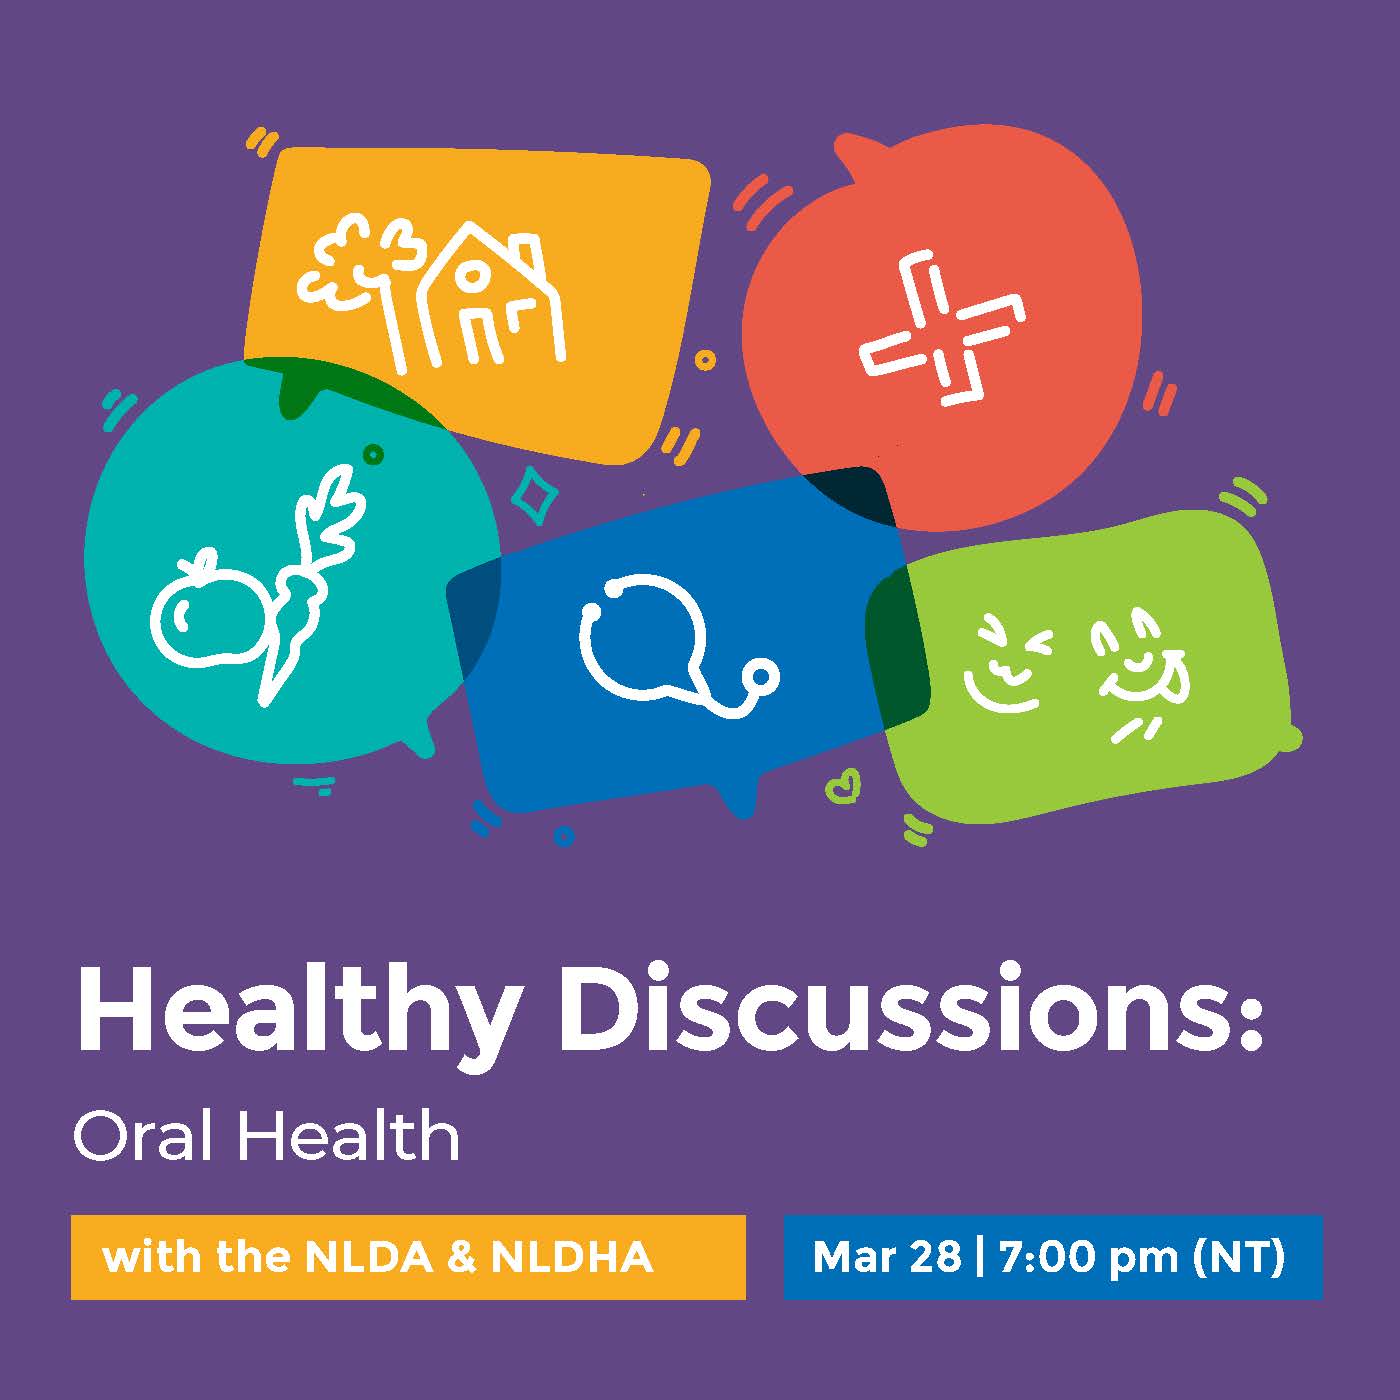 An image of 5 multicoloured speech balloons. Healthy Discussions: Oral Health with the NLDA & NLDHA. Mar 28, 7:00 pm (NT)